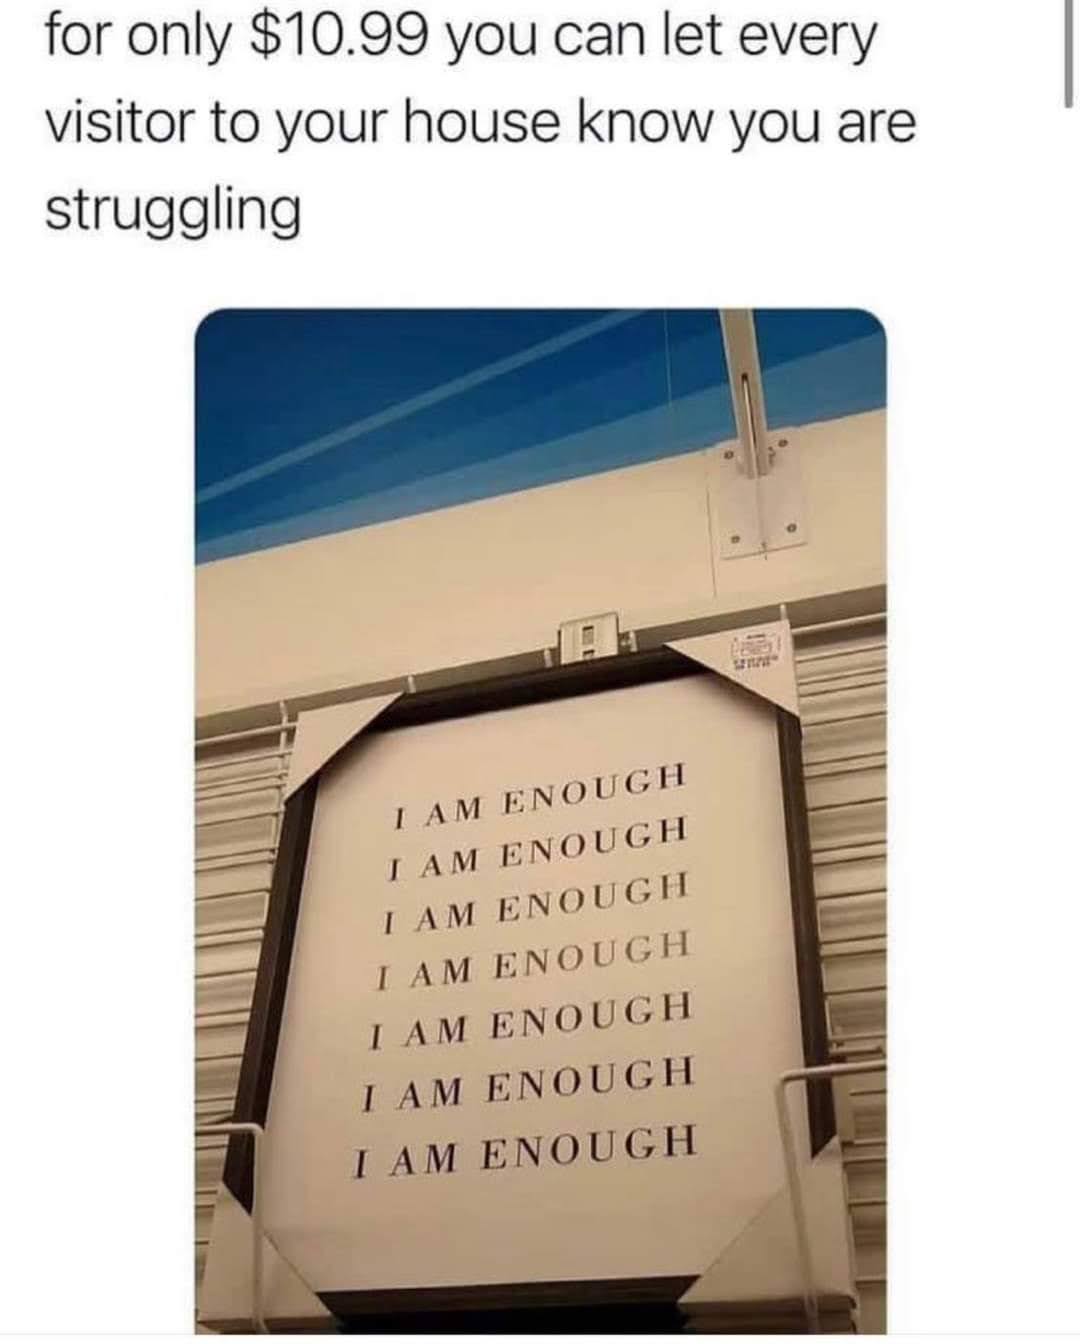 sad memes - only 10.99 you can let every visitor - for only $10.99 you can let every visitor to your house know you are struggling Le I Am Enough I Am Enough I Am Enough I Am Enough I Am Enough I Am Enough I Am Enough